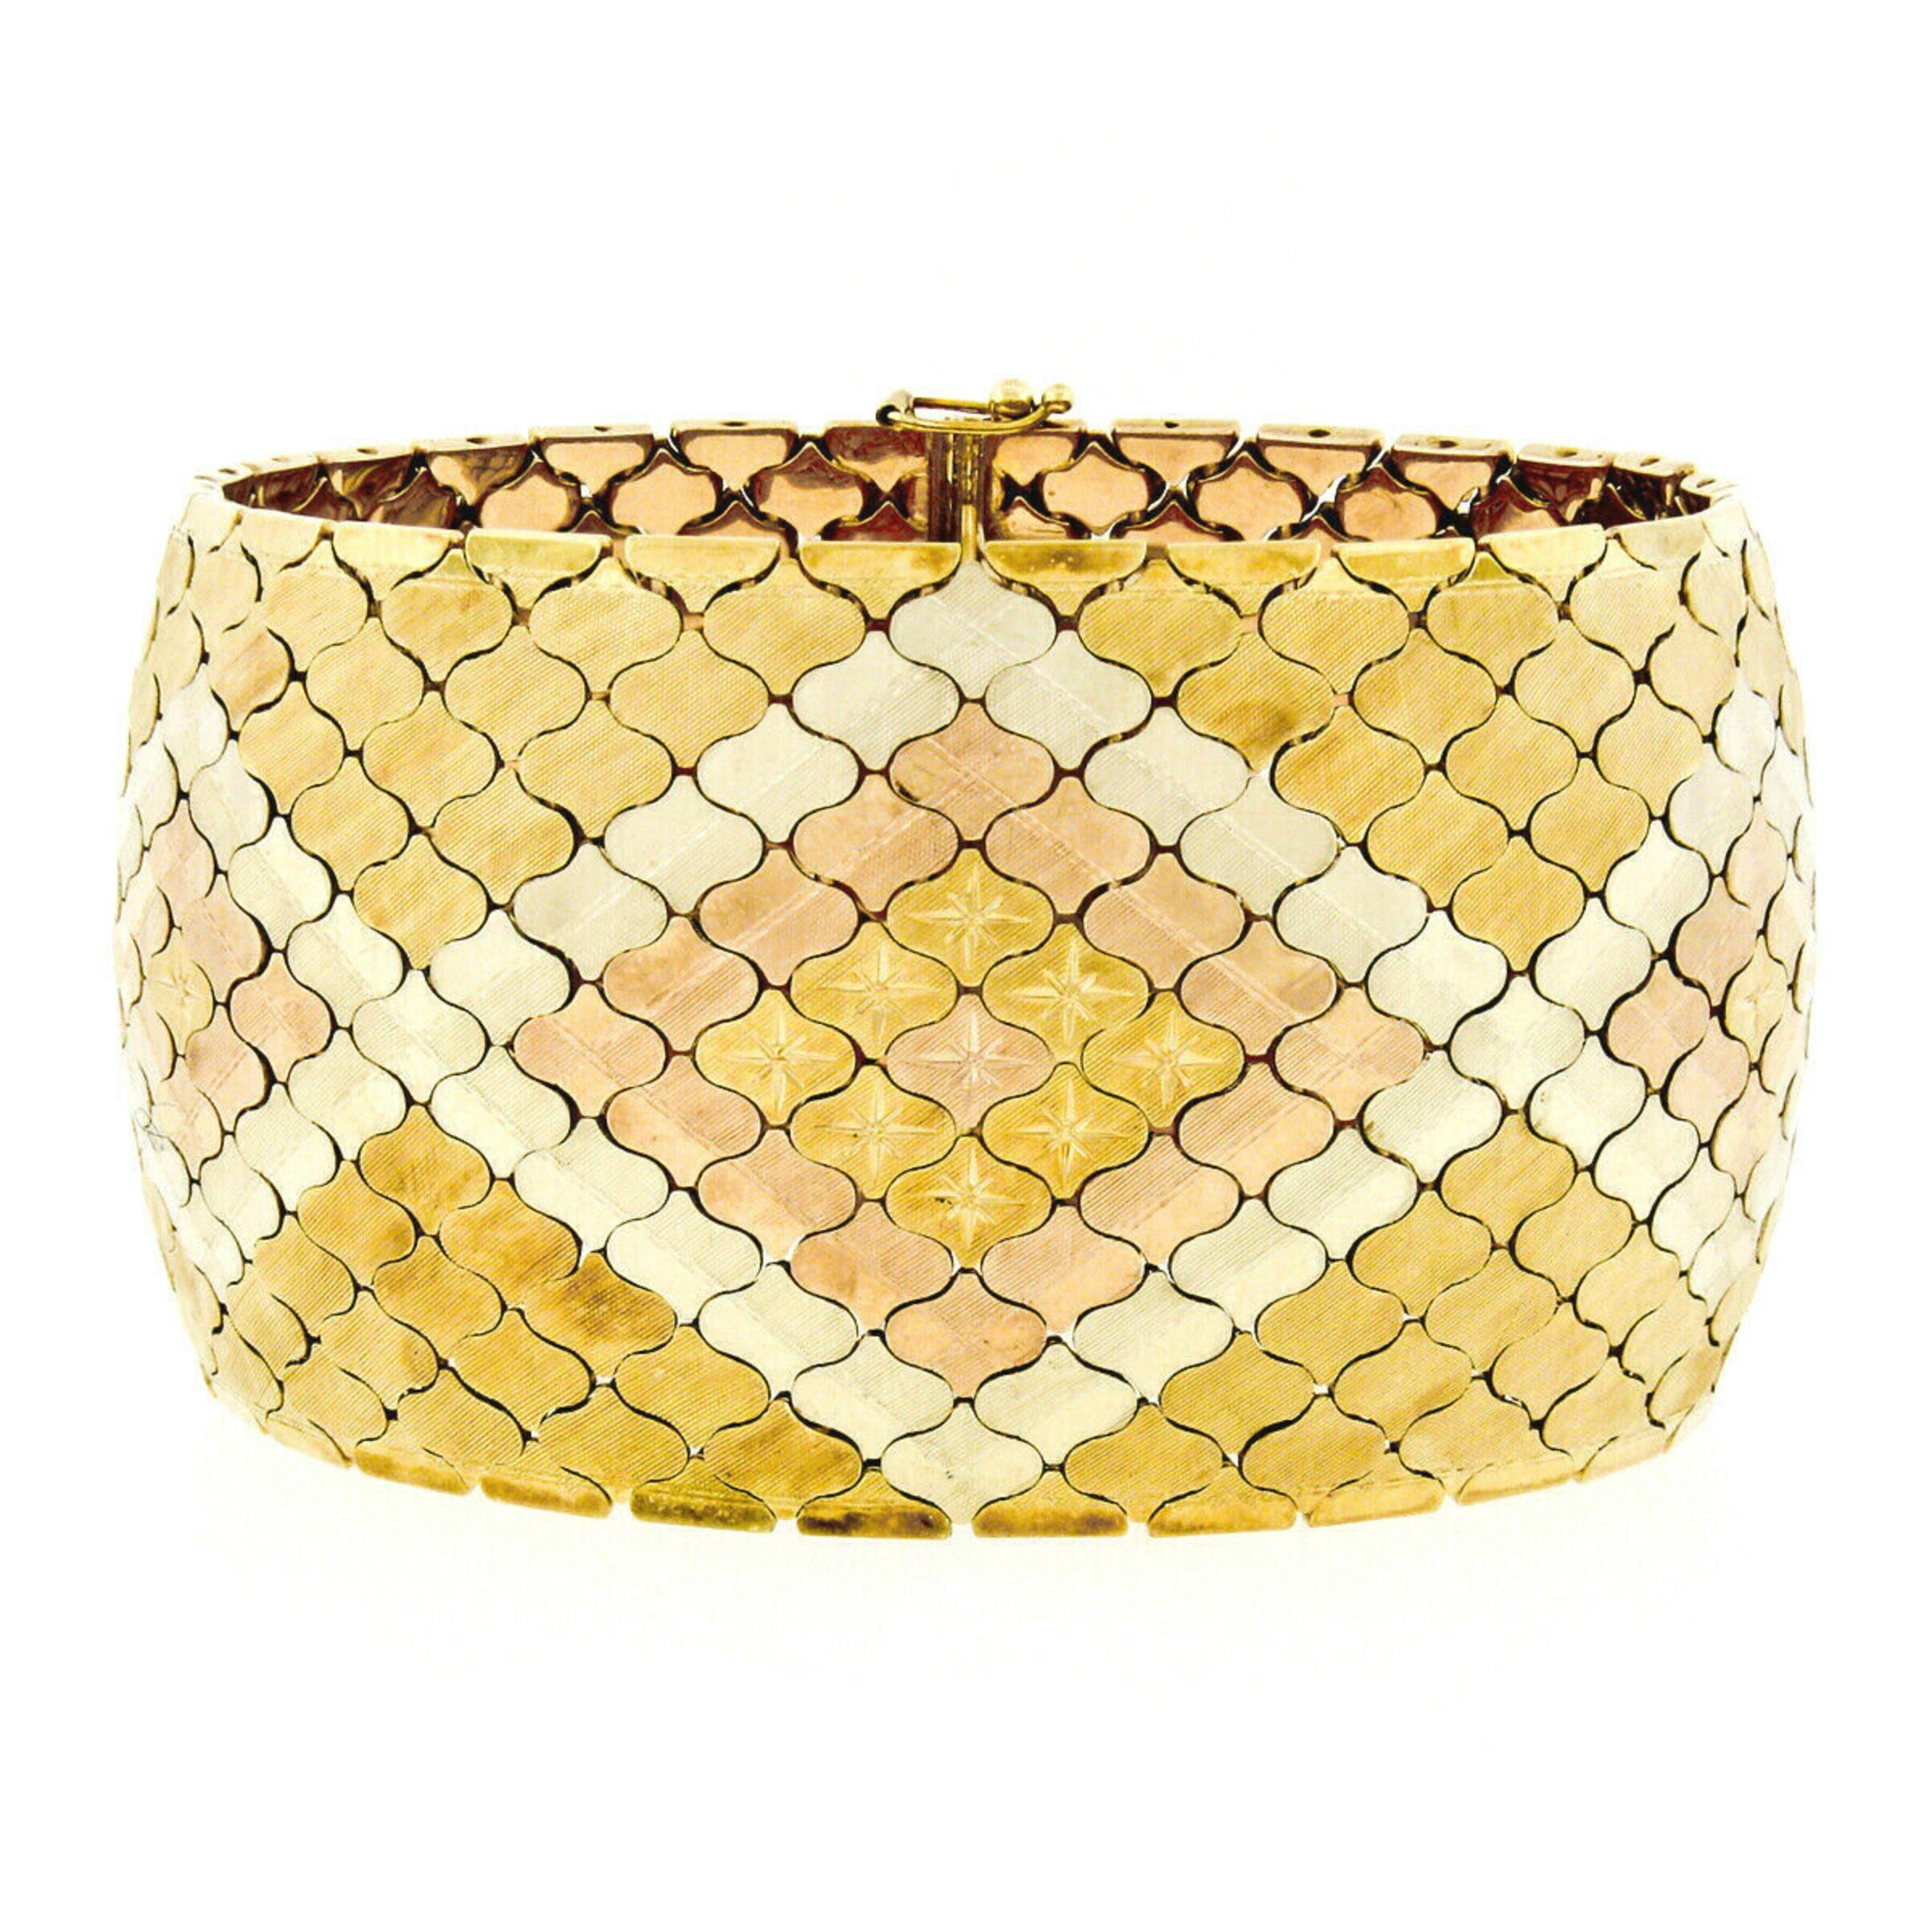 This gorgeous vintage bracelet was crafted in Italy from solid 14k yellow, white, and rose gold. It features a diamond pattern beautifully executed in tri-color gold mesh links. In addition to the differences in color there are also etched star